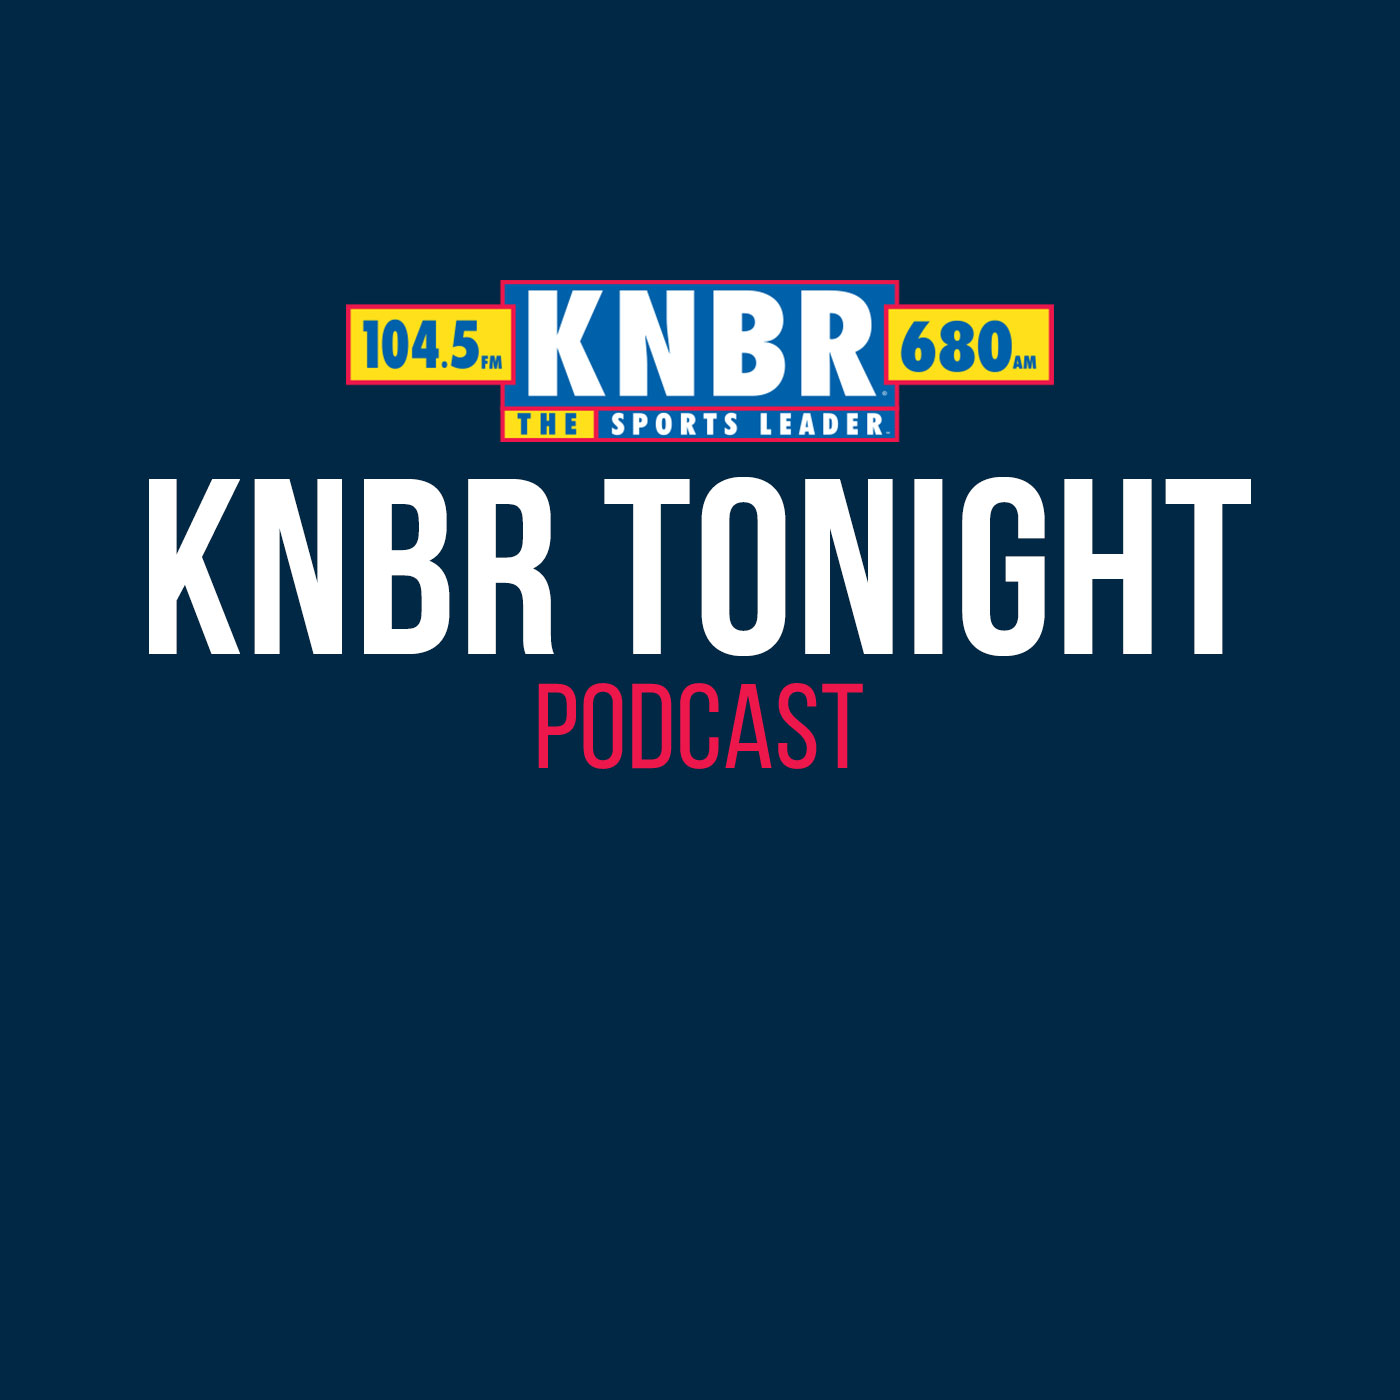 12-15 Matt Barrows joins KNBR Tonight with Kerry with an update on Dee Ford, the cornerback situation and a break down of week 15 matchup vs the Falcons